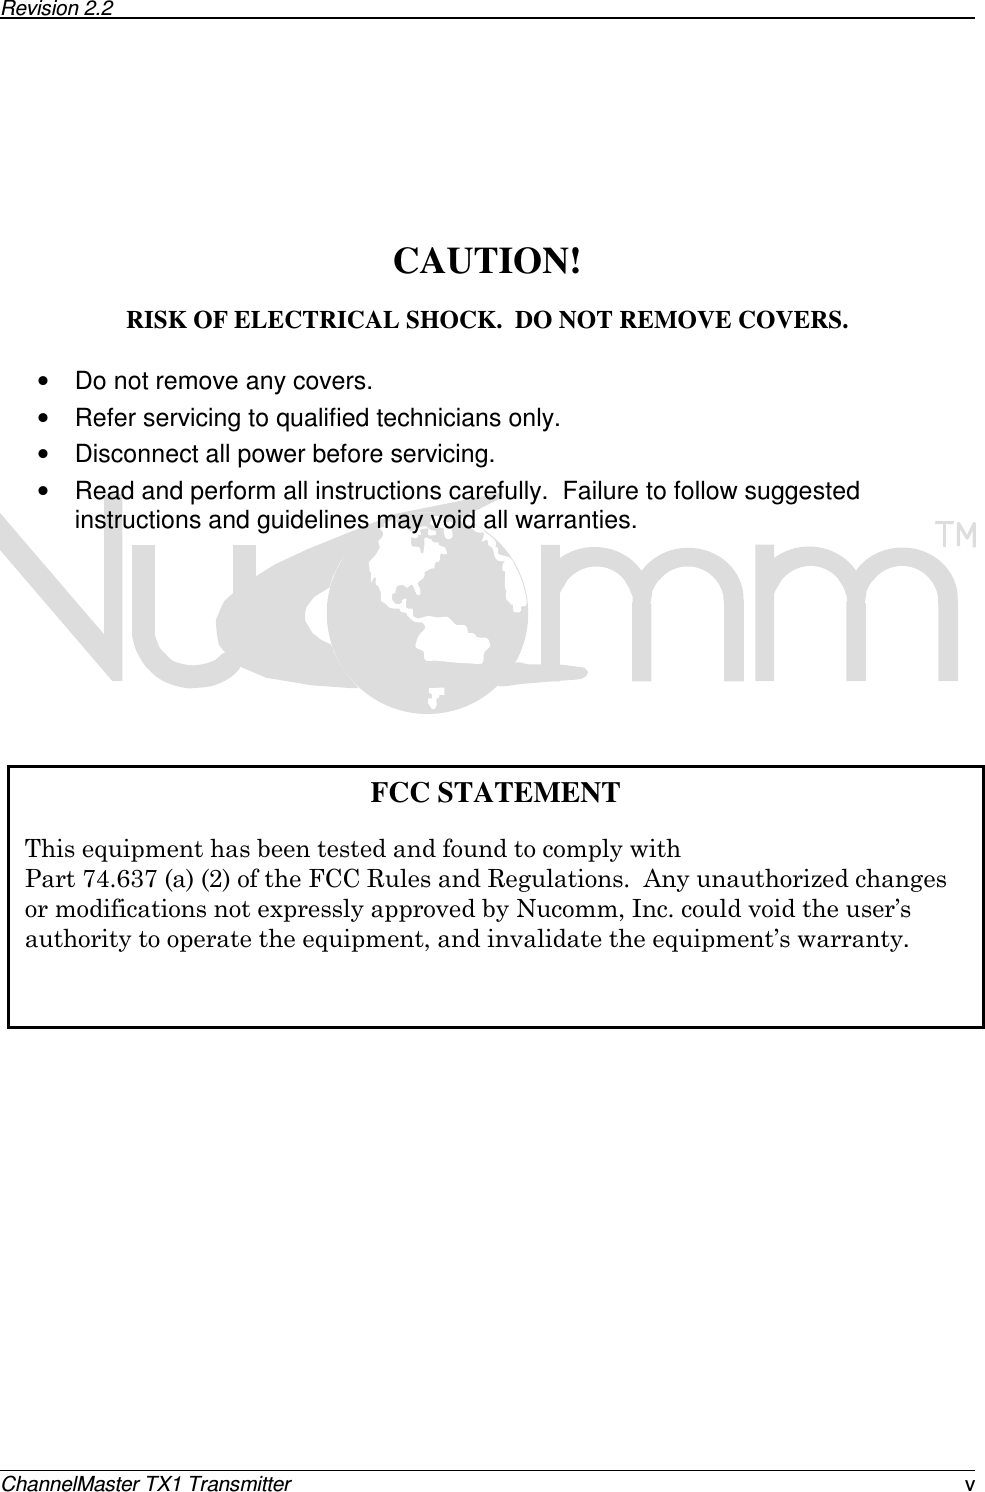 Revision 2.2      ChannelMaster TX1 Transmitter  v        CAUTION!  RISK OF ELECTRICAL SHOCK.  DO NOT REMOVE COVERS.  •  Do not remove any covers. •  Refer servicing to qualified technicians only. •  Disconnect all power before servicing. •  Read and perform all instructions carefully.  Failure to follow suggested instructions and guidelines may void all warranties.                          FCC STATEMENT   !!&quot;&quot;#$%#&amp;&apos;()*&apos;+)&apos;+.  